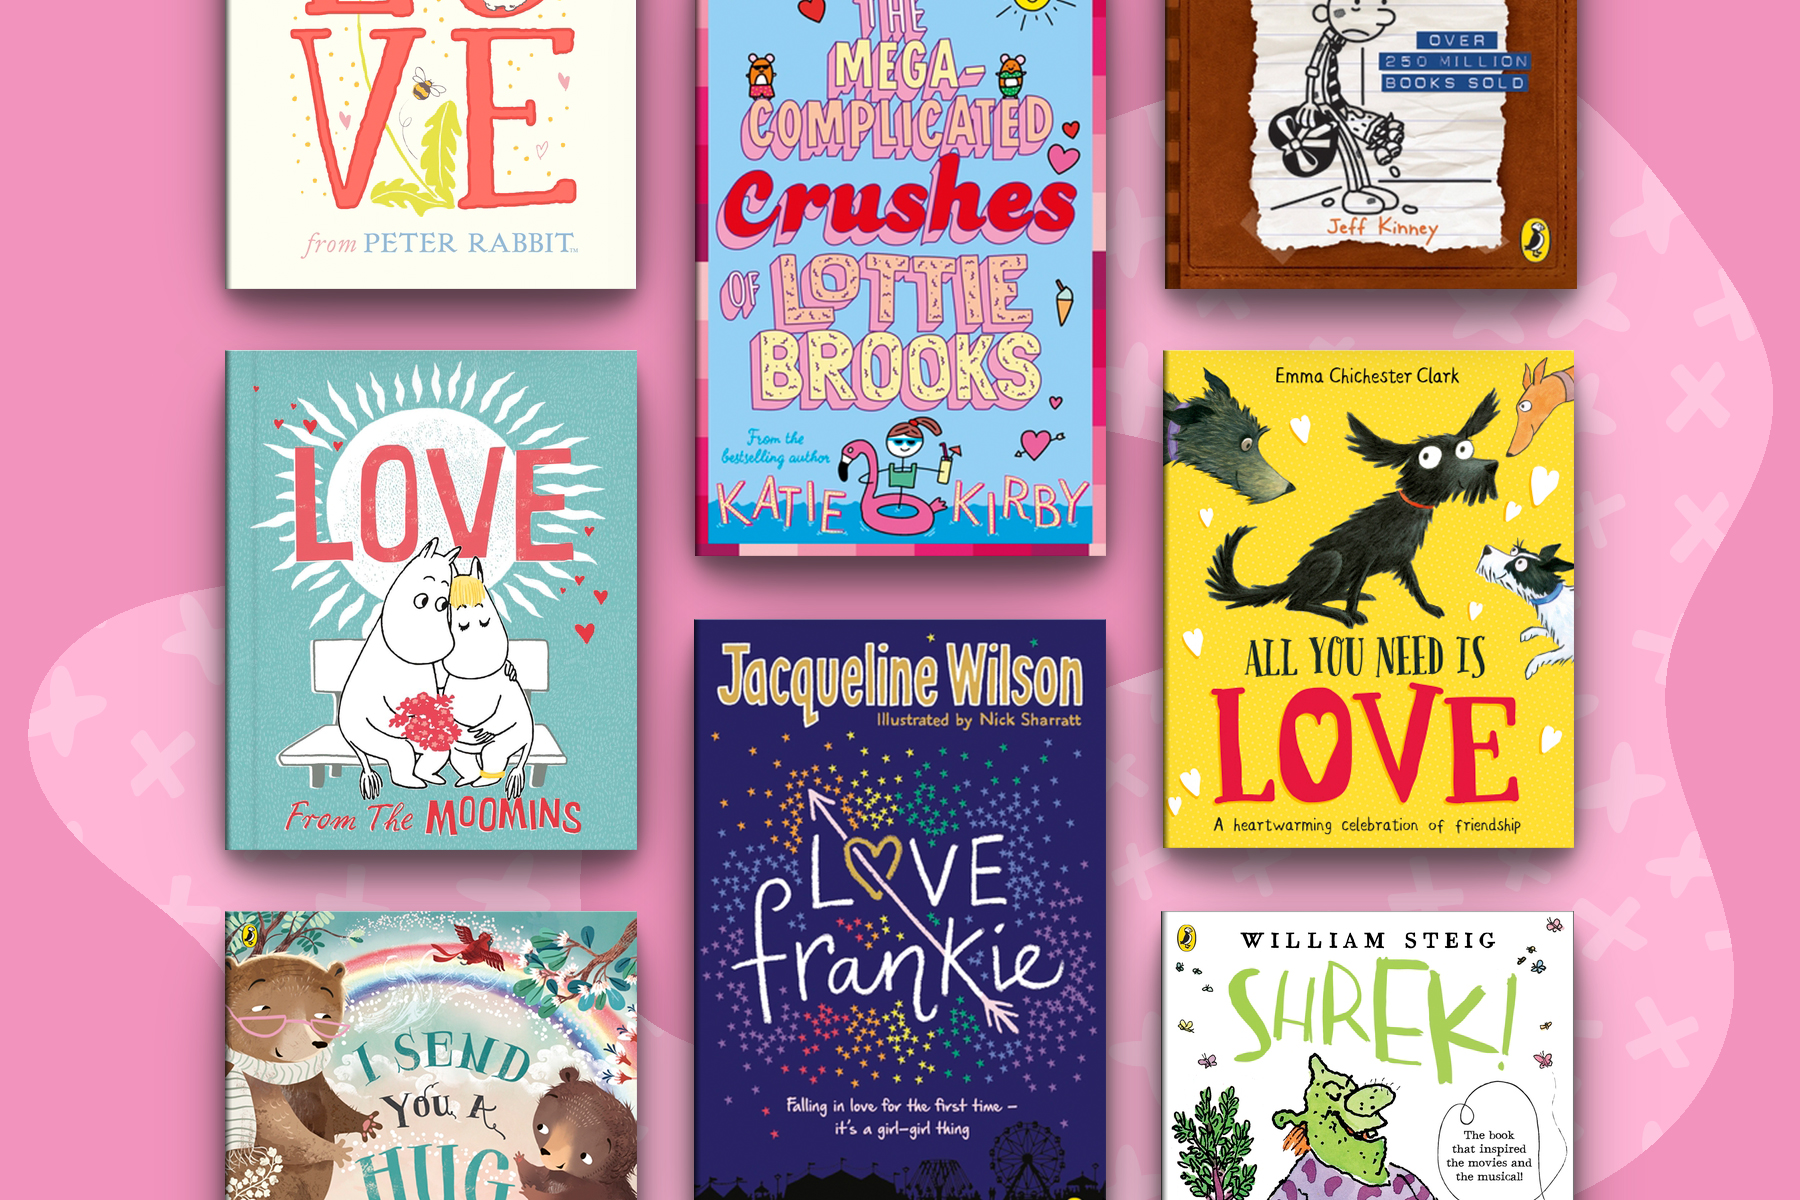 An image of a selection of childrens books about love on a pink background. There is a light pink splodge filled with light pink crosses